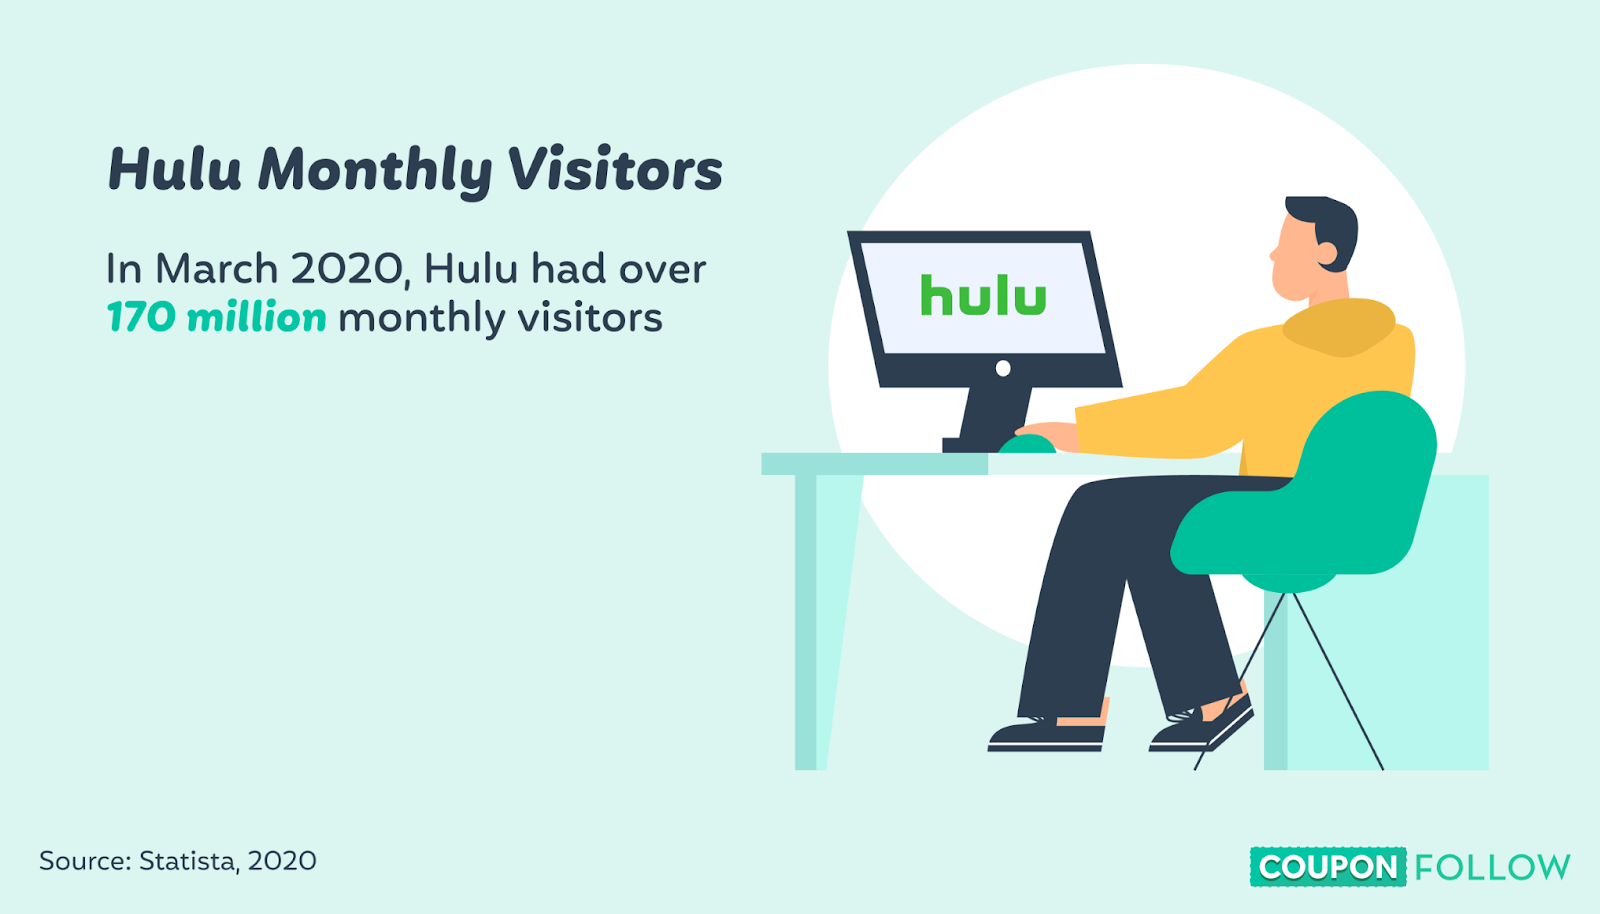 Image Showing the Number of Monthly Hulu Visitors